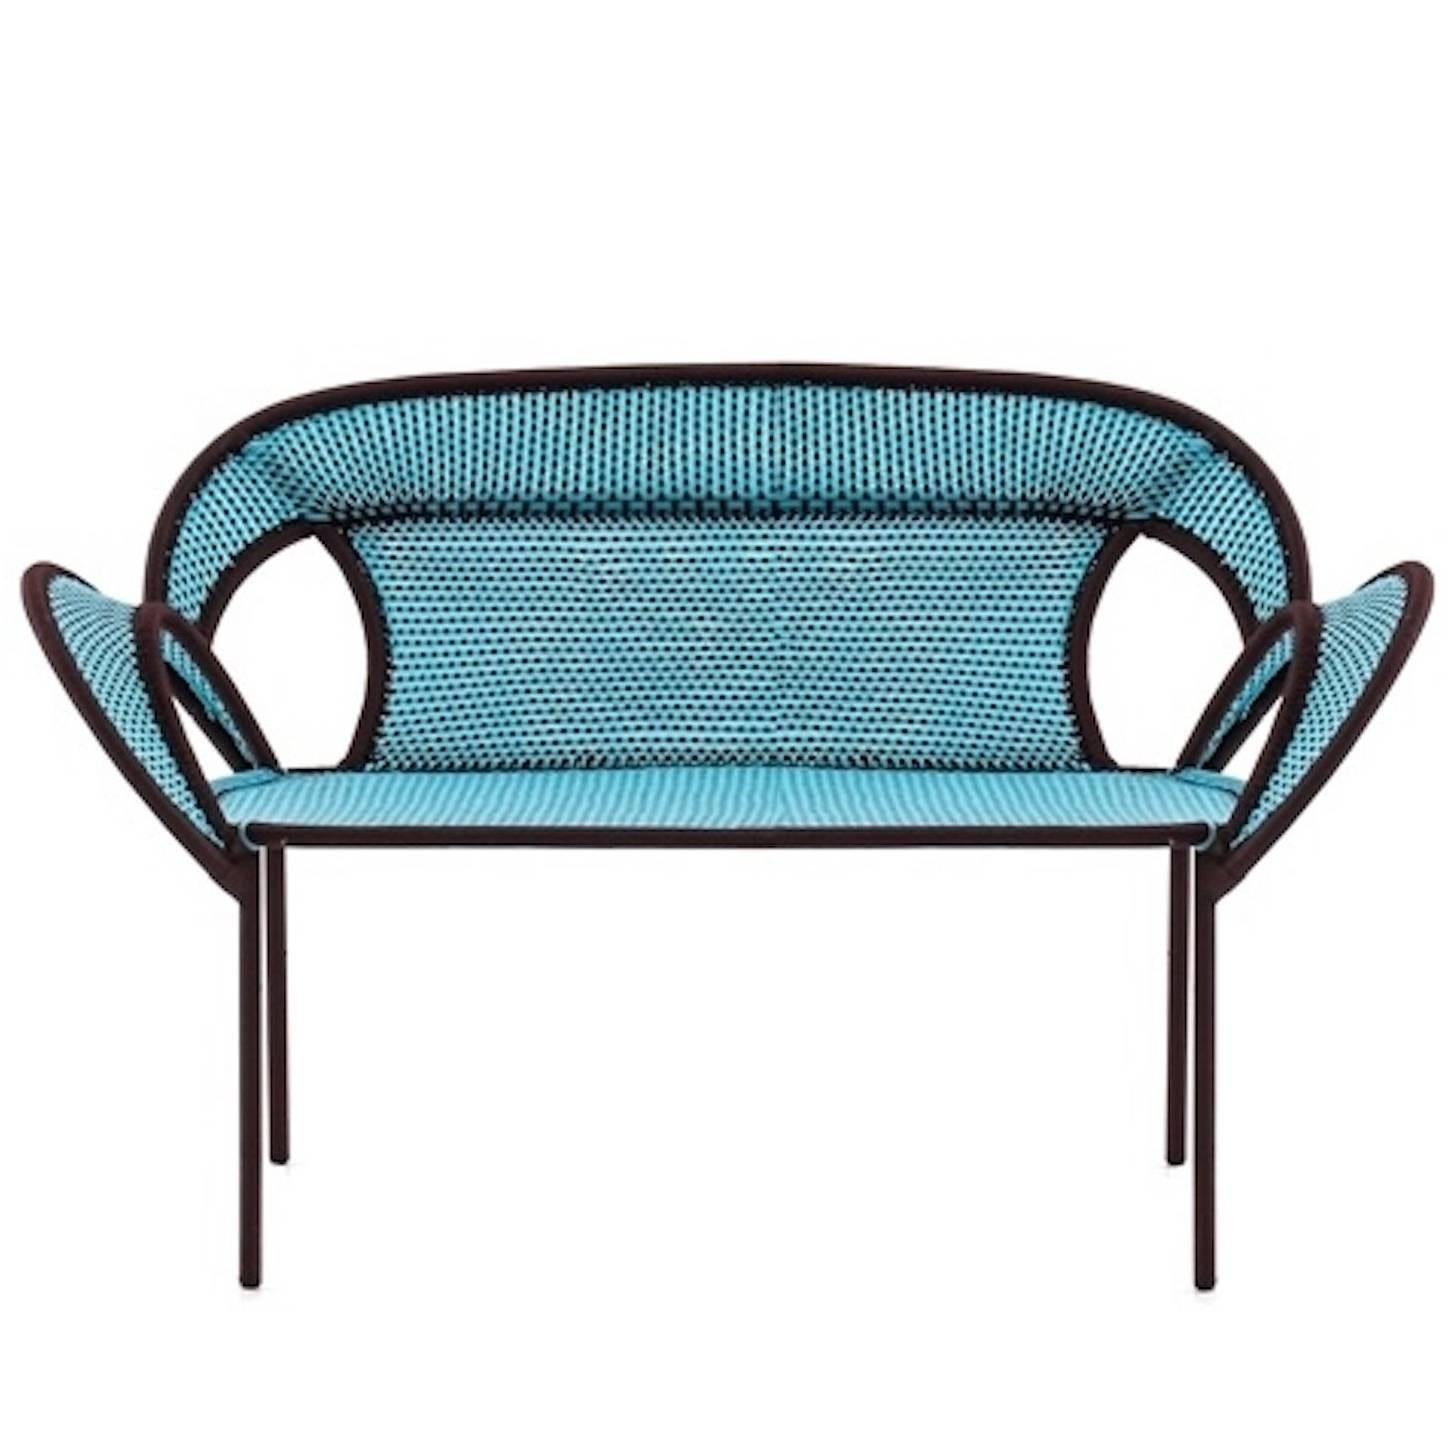 Moroso Banjooli Settee for Outdoors in 10 Different Color Combinations For Sale